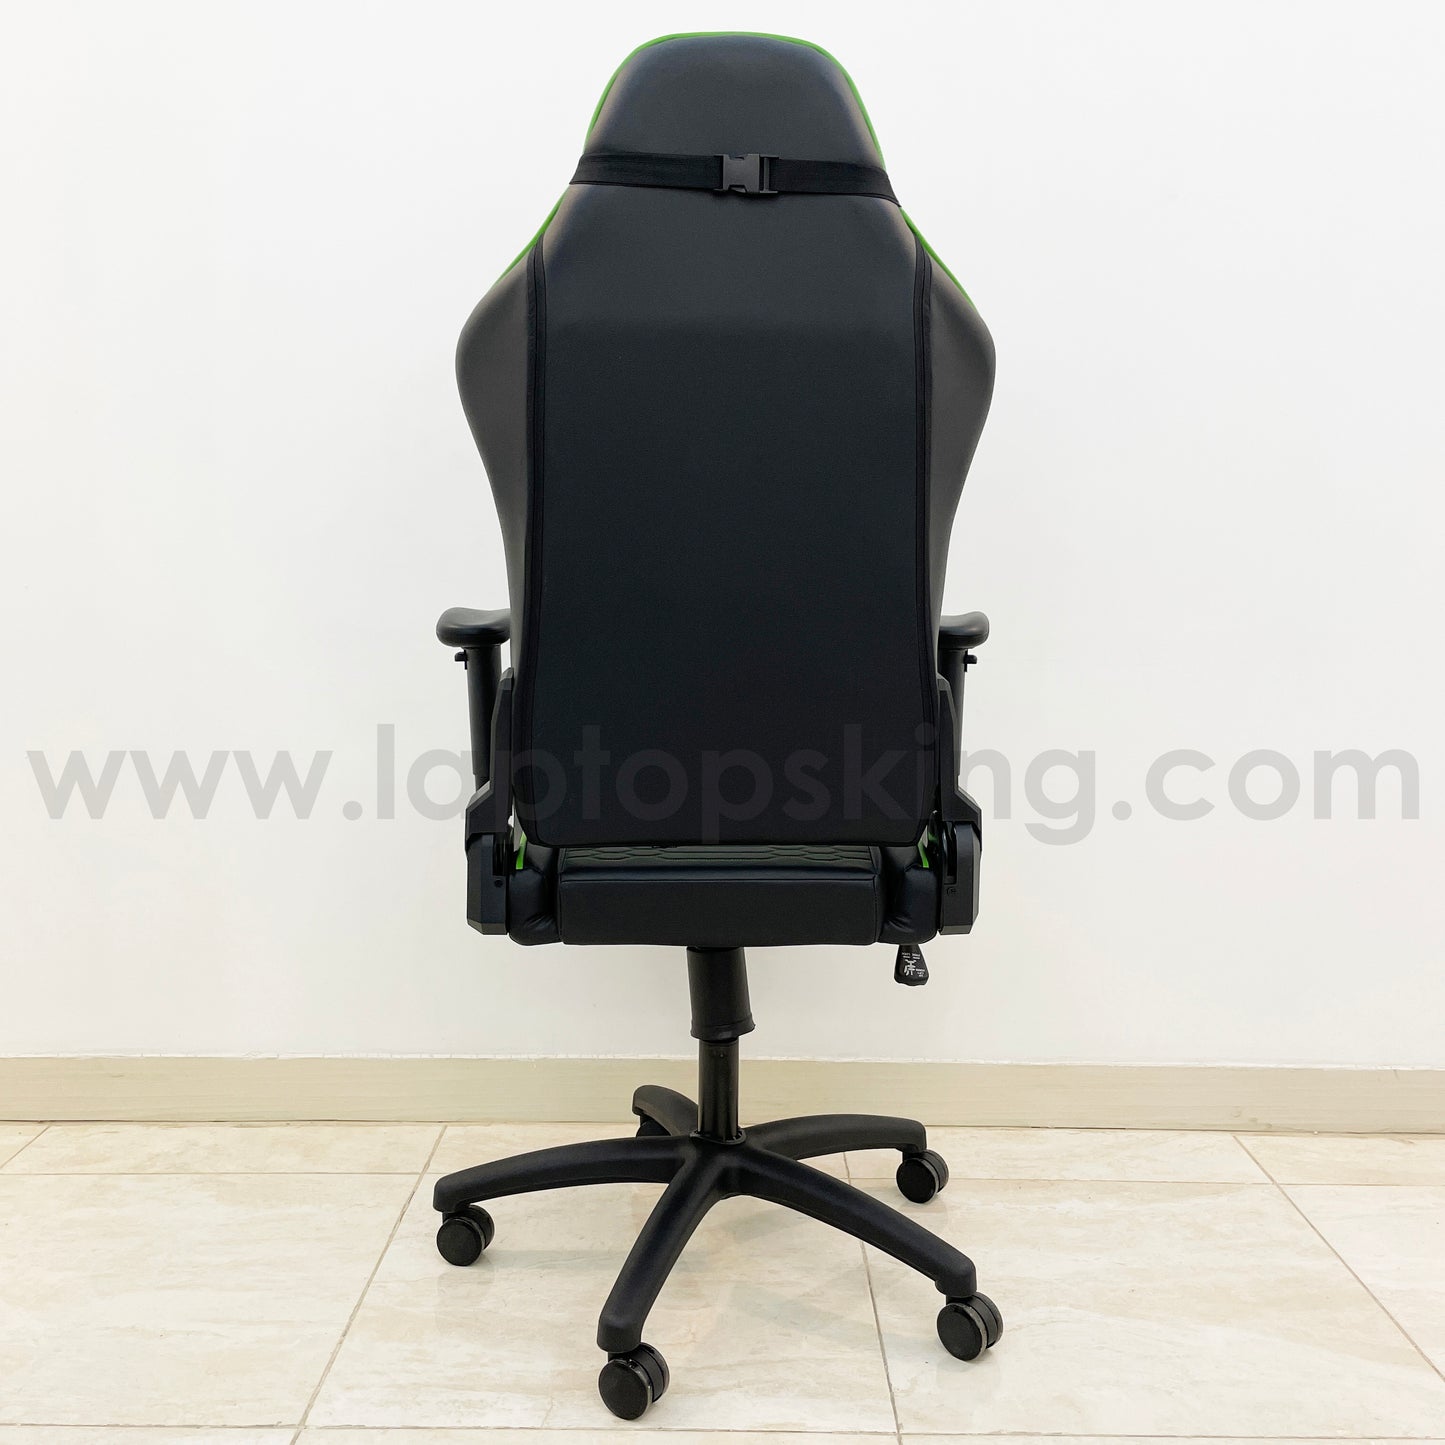 Dragon War DK-867 Green Edition High Quality Gaming Chair Offer (Brand New)